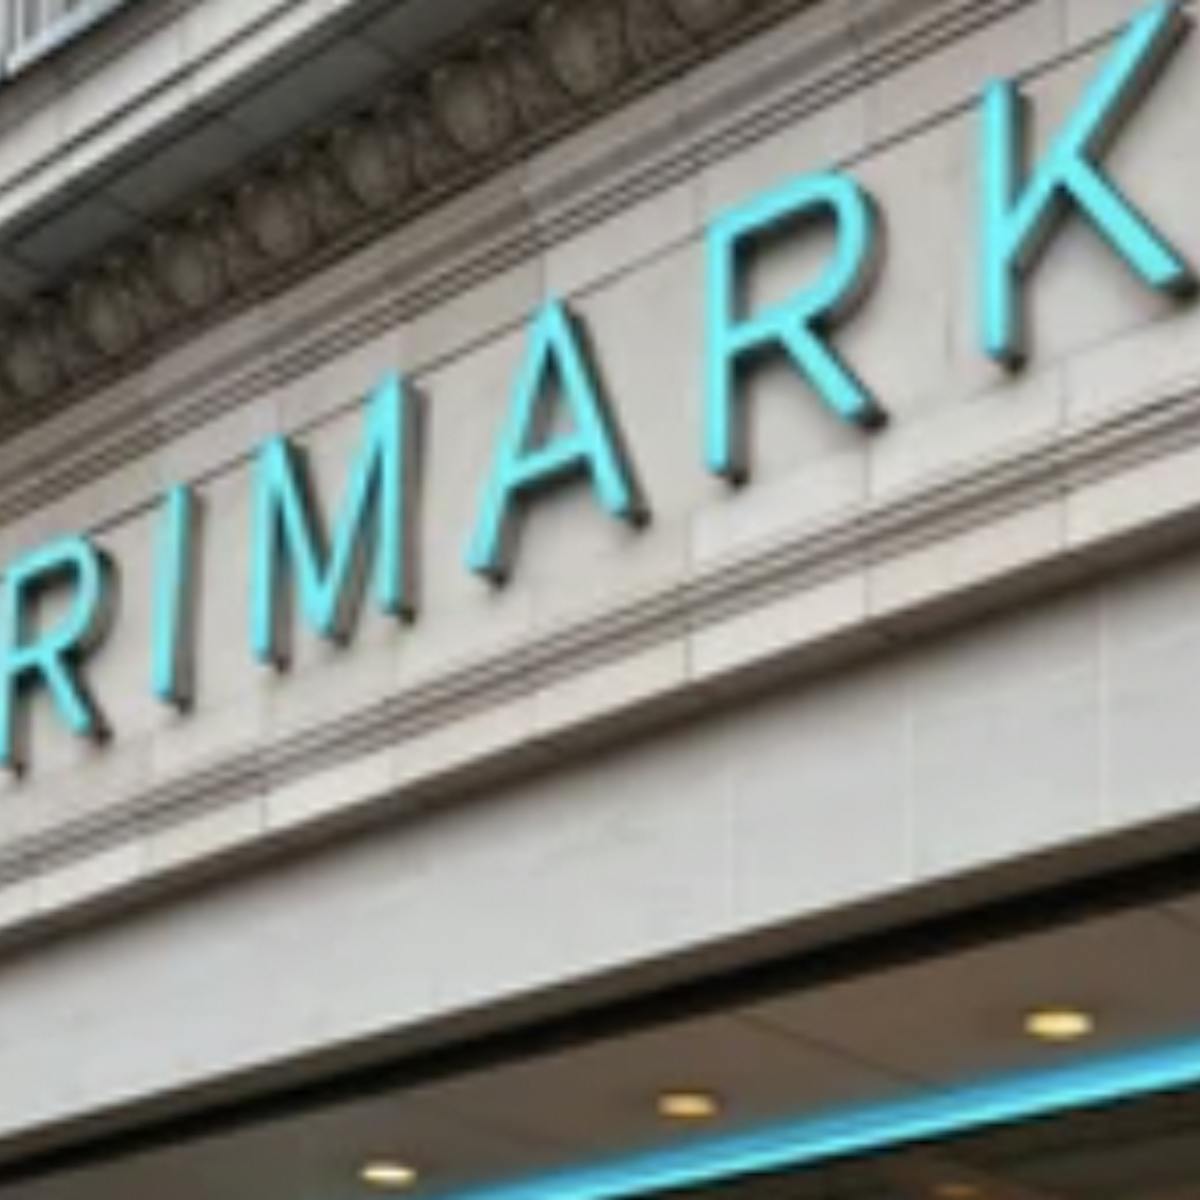 Primark fans rushing to buy 'so cosy' £10 teddy bags that are